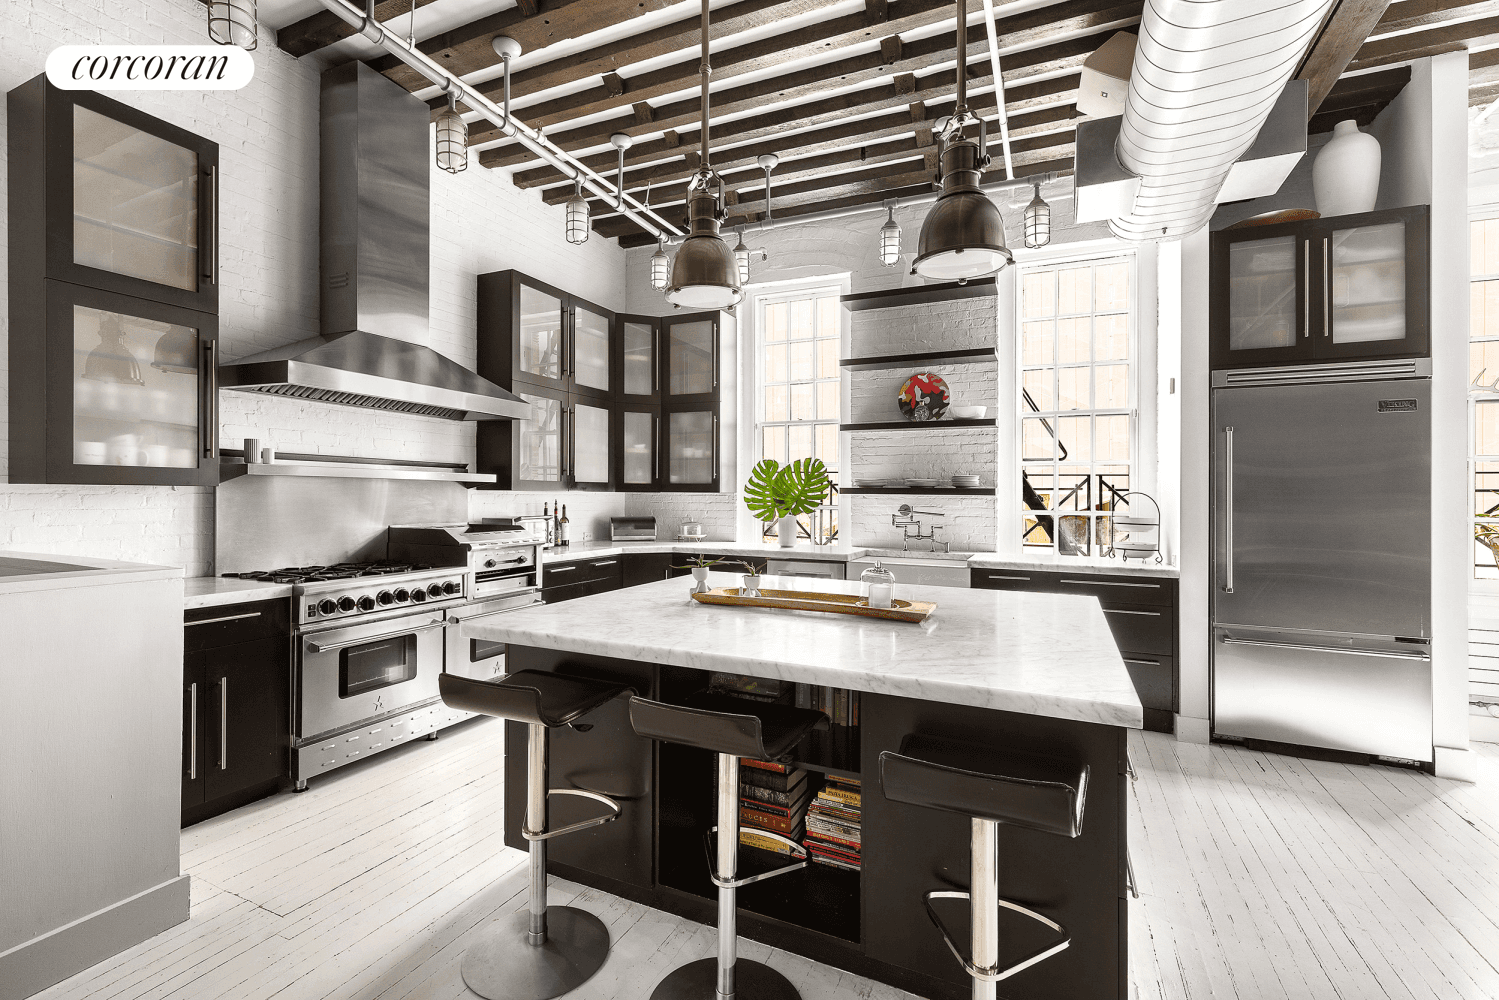 Don't miss out on the opportunity to own this remarkable, one of a kind loft situated on a iconic cobblestone street in TriBeCa's renowned Historic District.